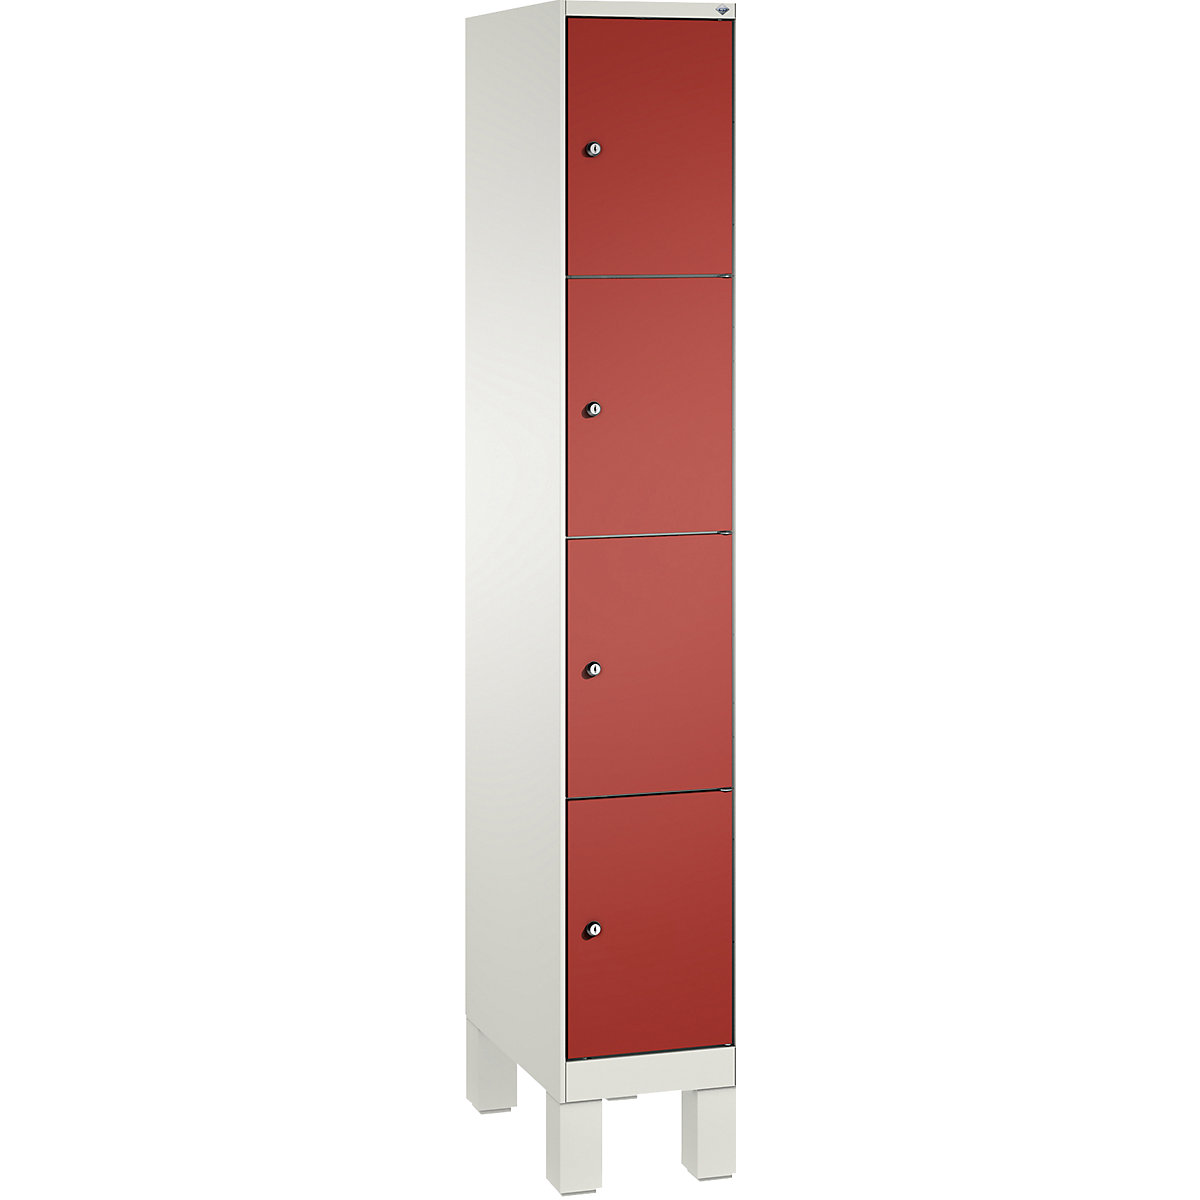 EVOLO locker unit, with feet – C+P, 1 compartment, 4 shelf compartments, compartment width 300 mm, traffic white / flame red